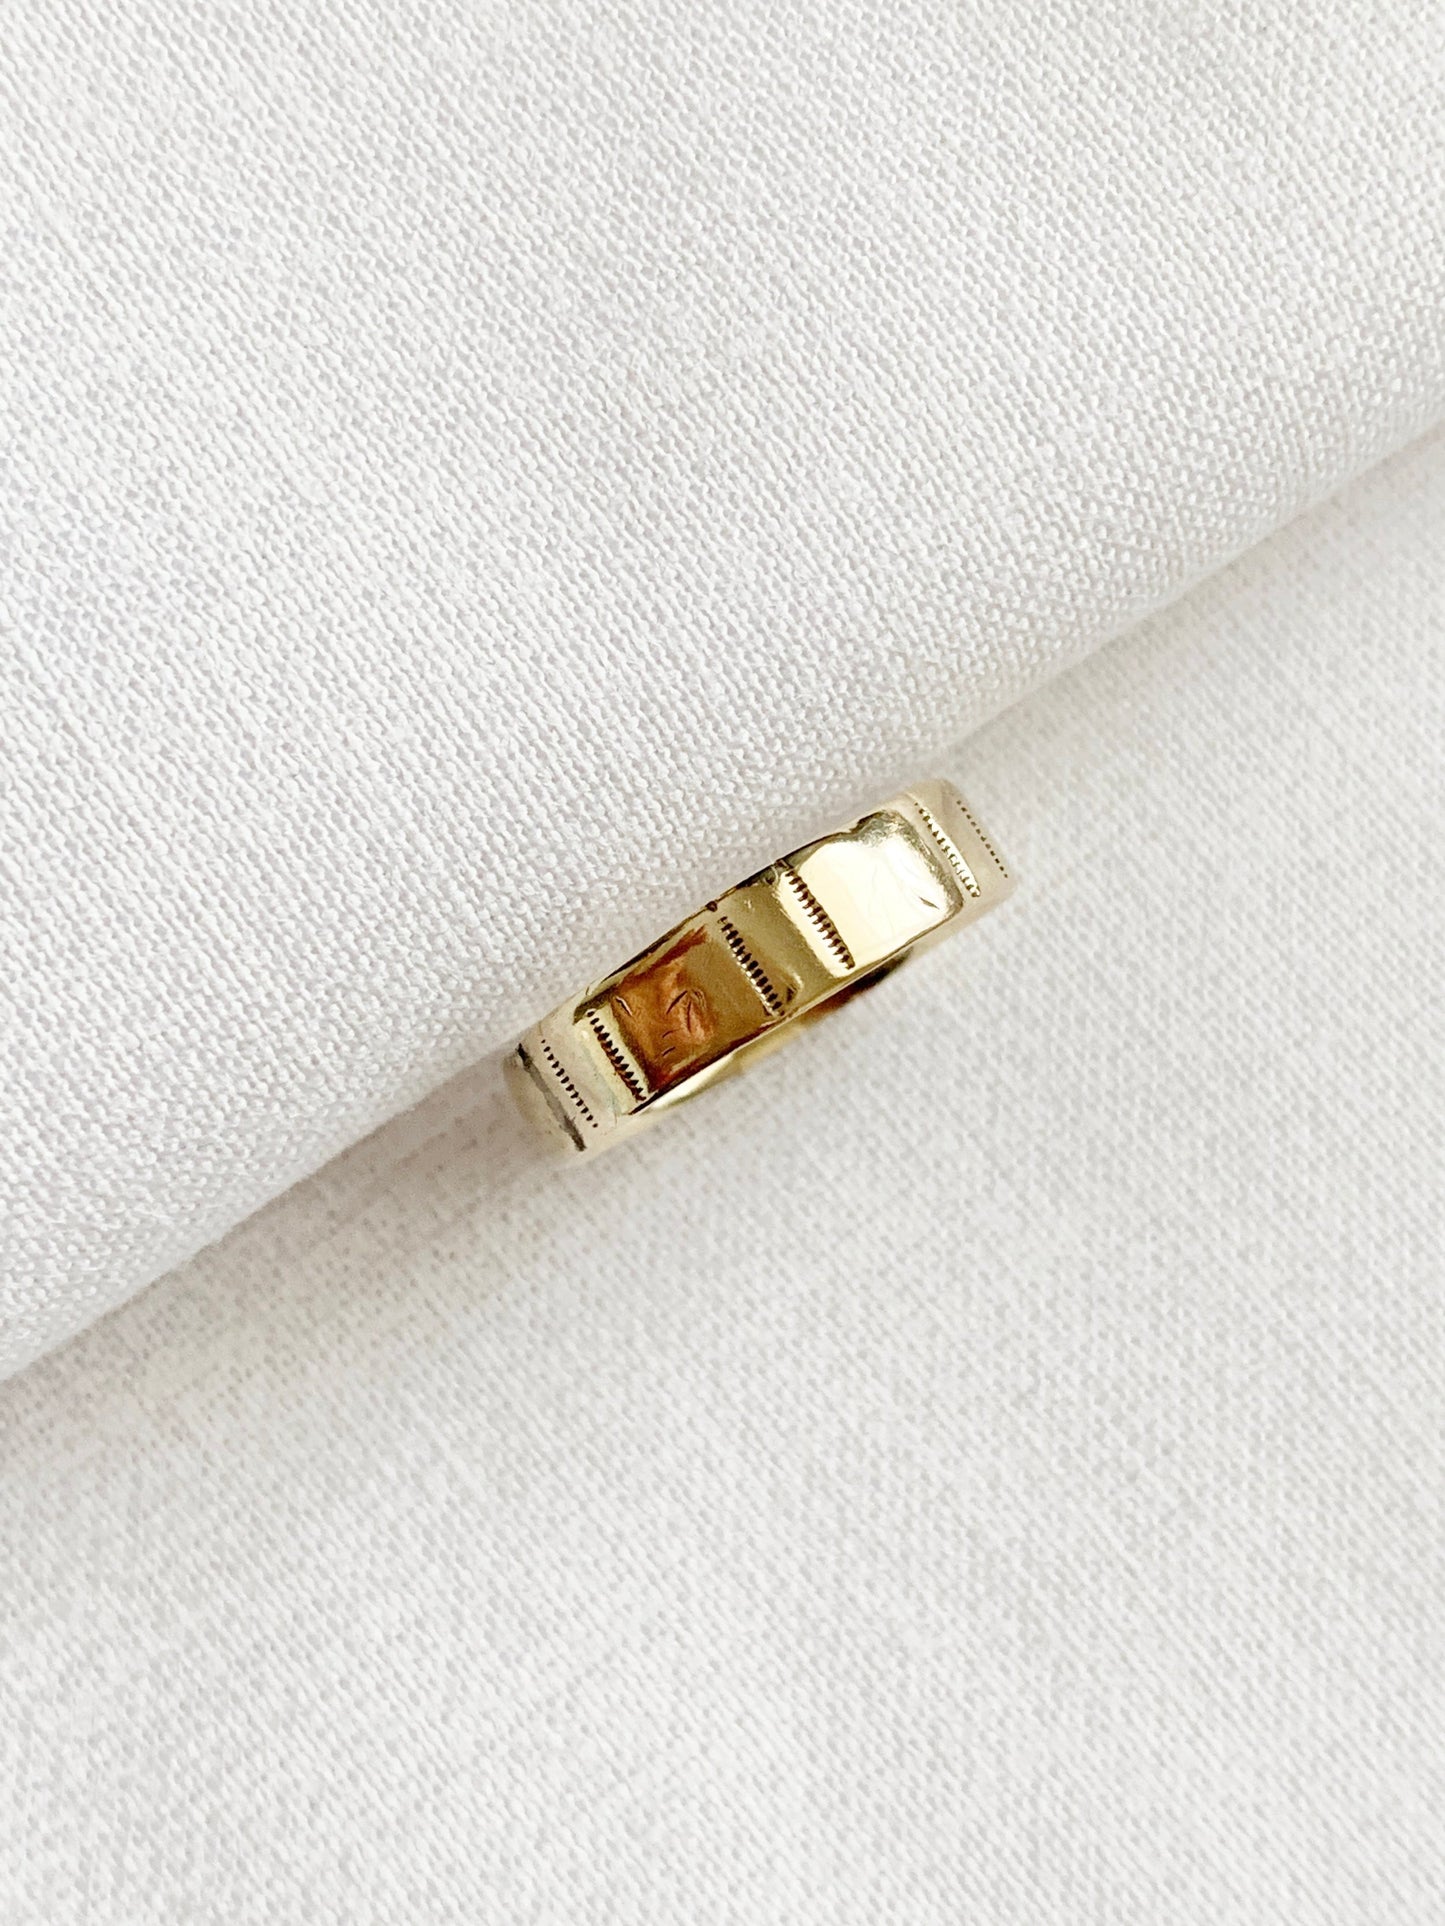 Rare Old Vintage 1940s 9ct Gold Midi Ring/Pinky Ring